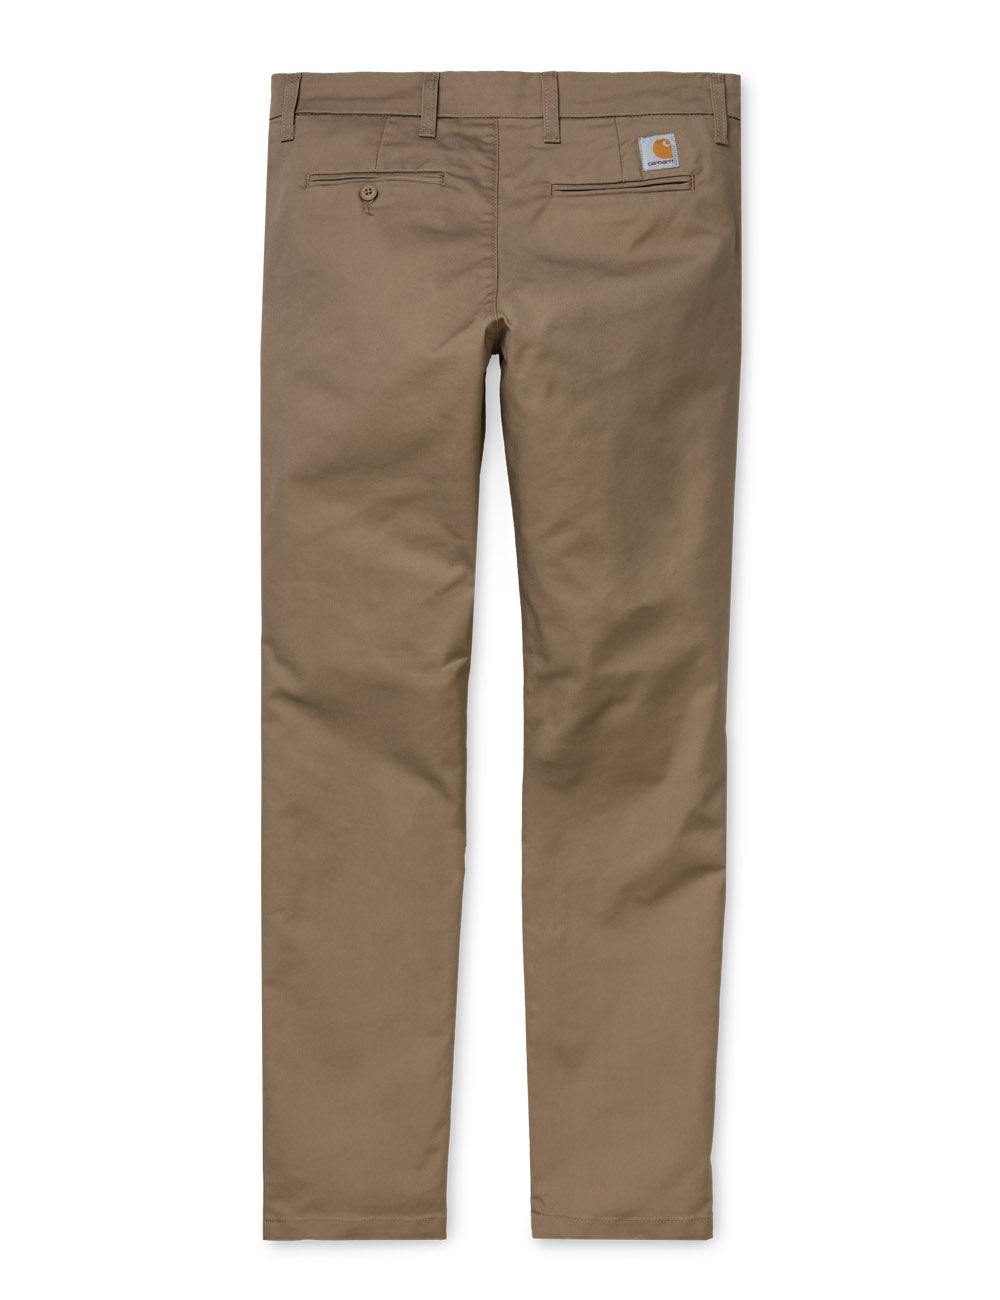 CARHARTT WIP SID CHINO PANT LEATHER RINSED